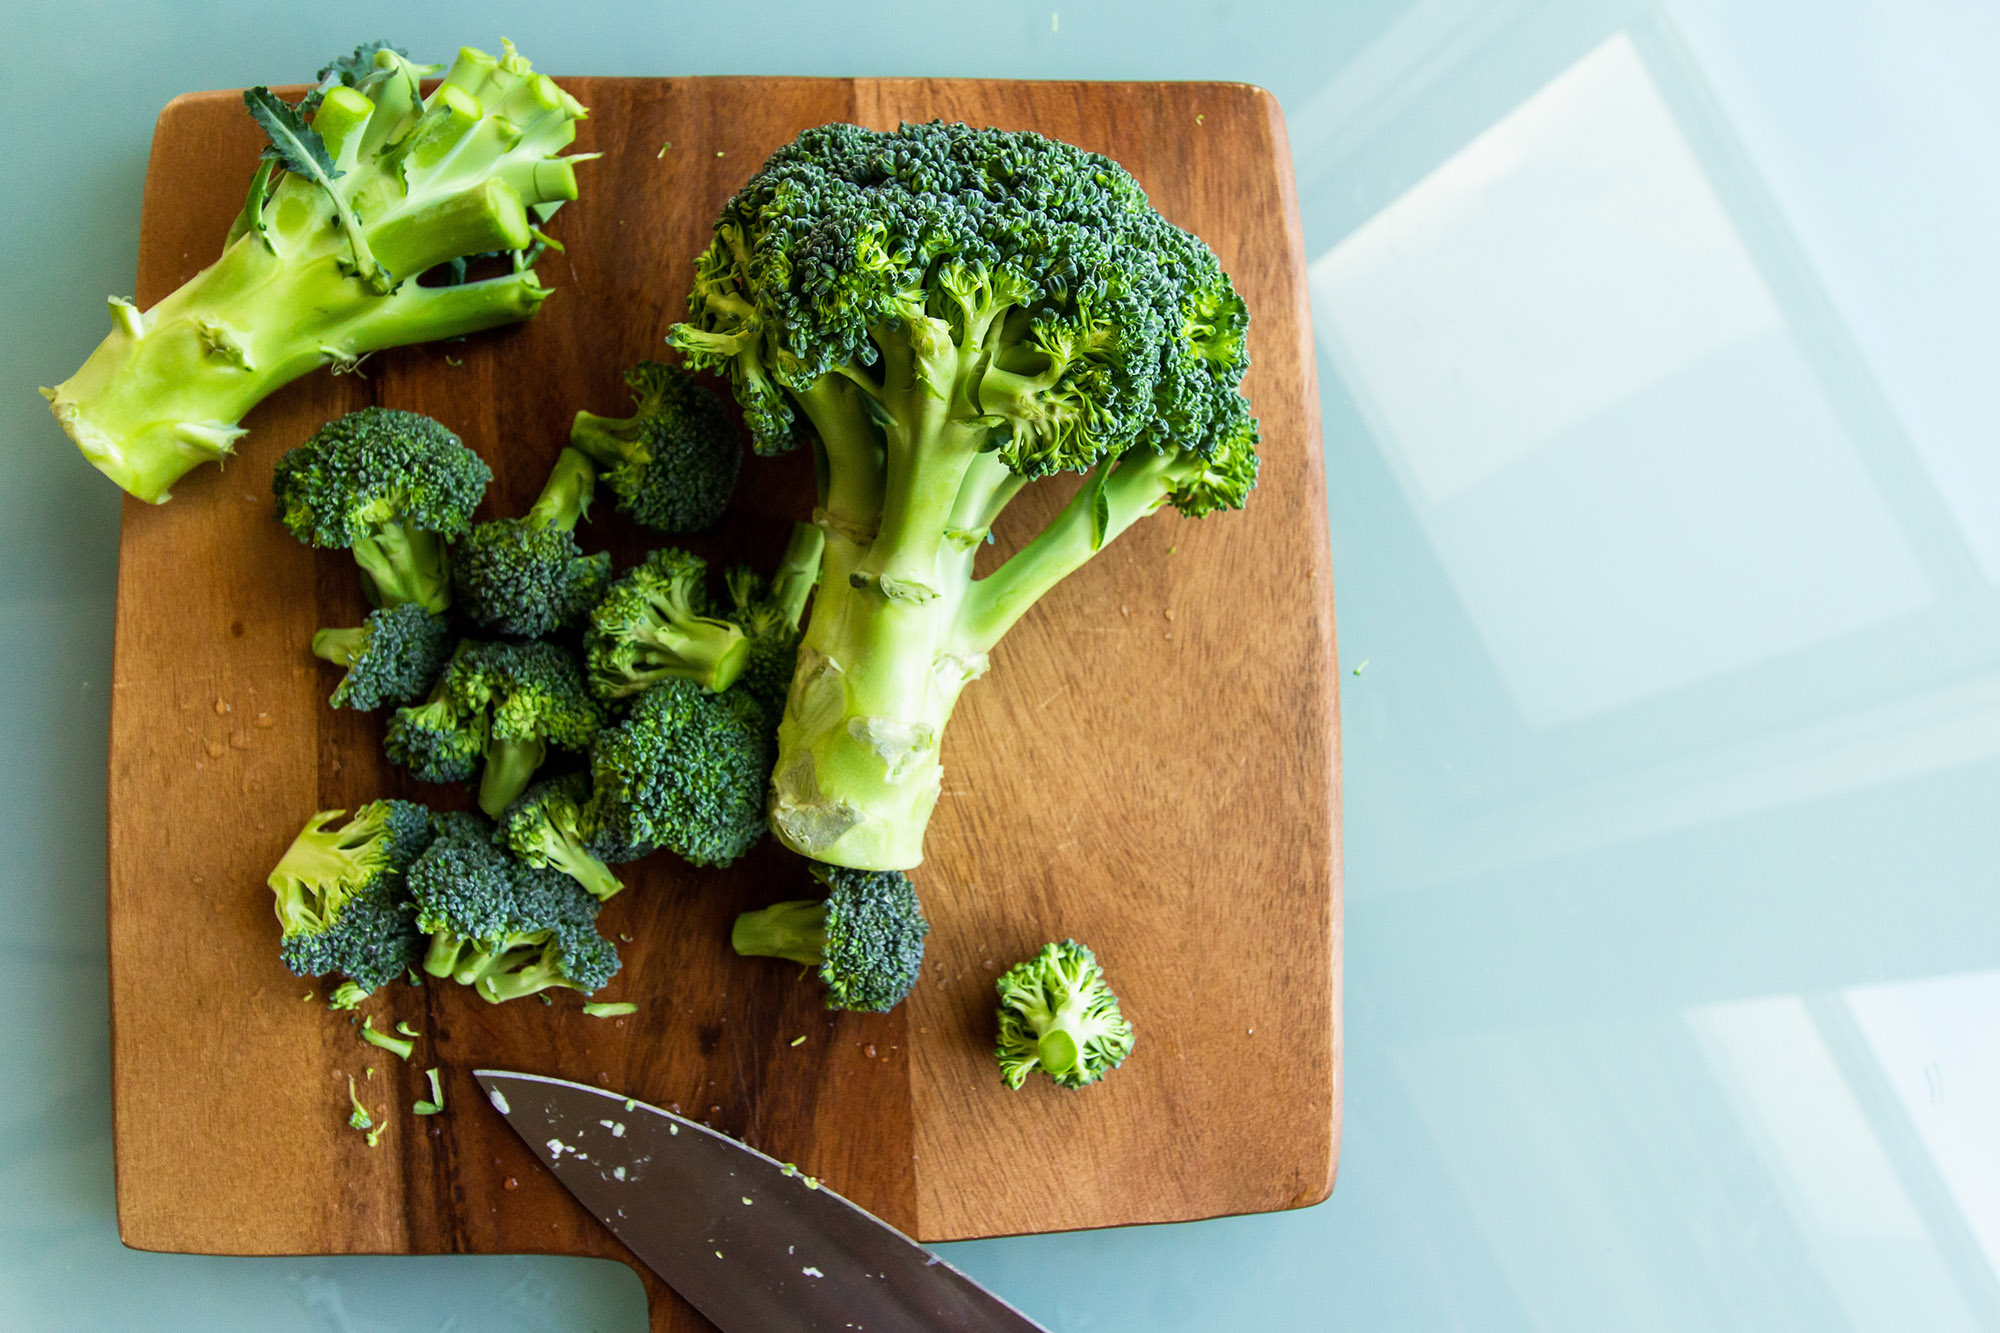 Are there ways you can look at broccoli a little differently?